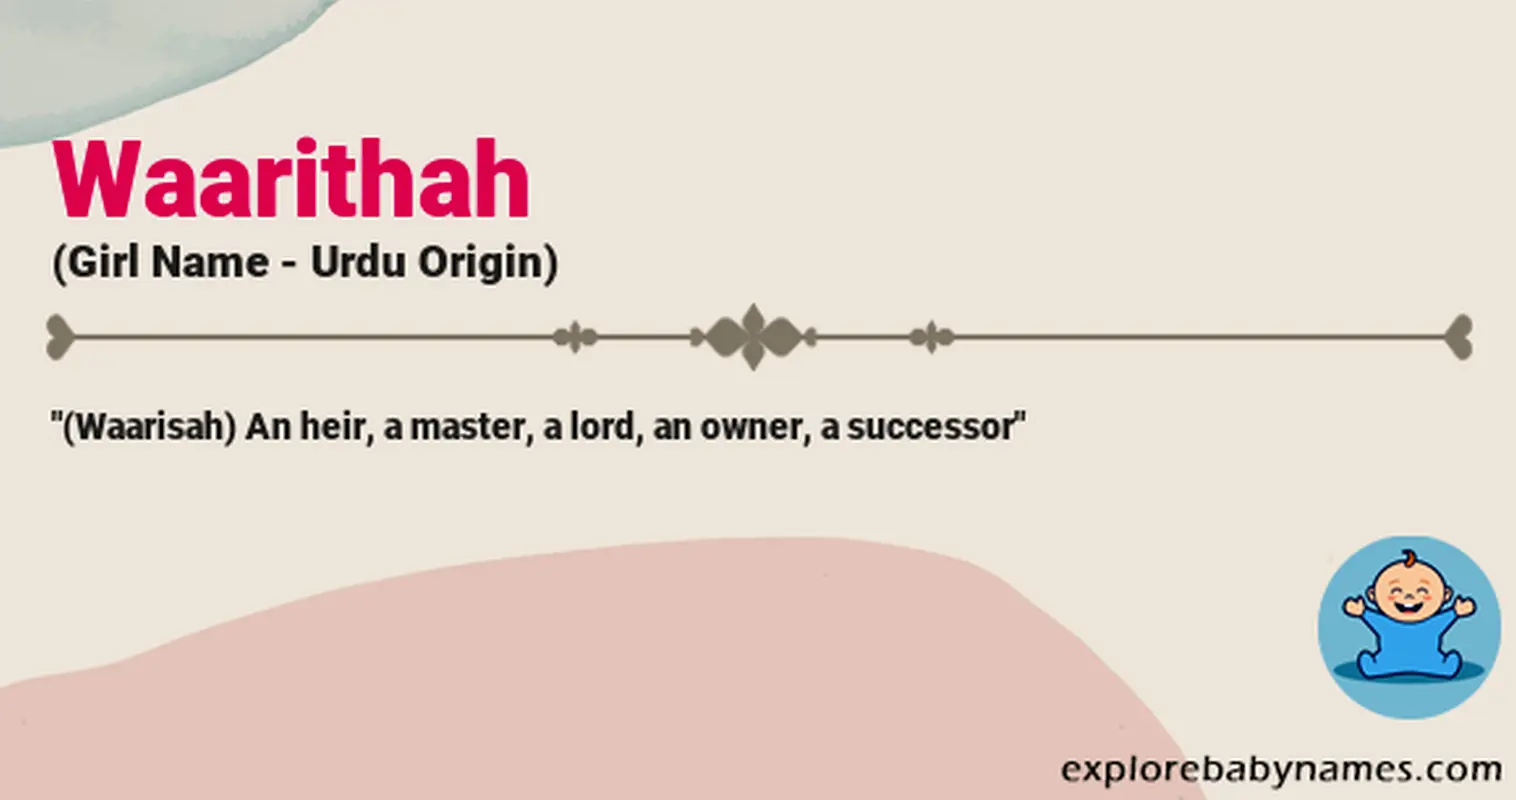 Meaning of Waarithah